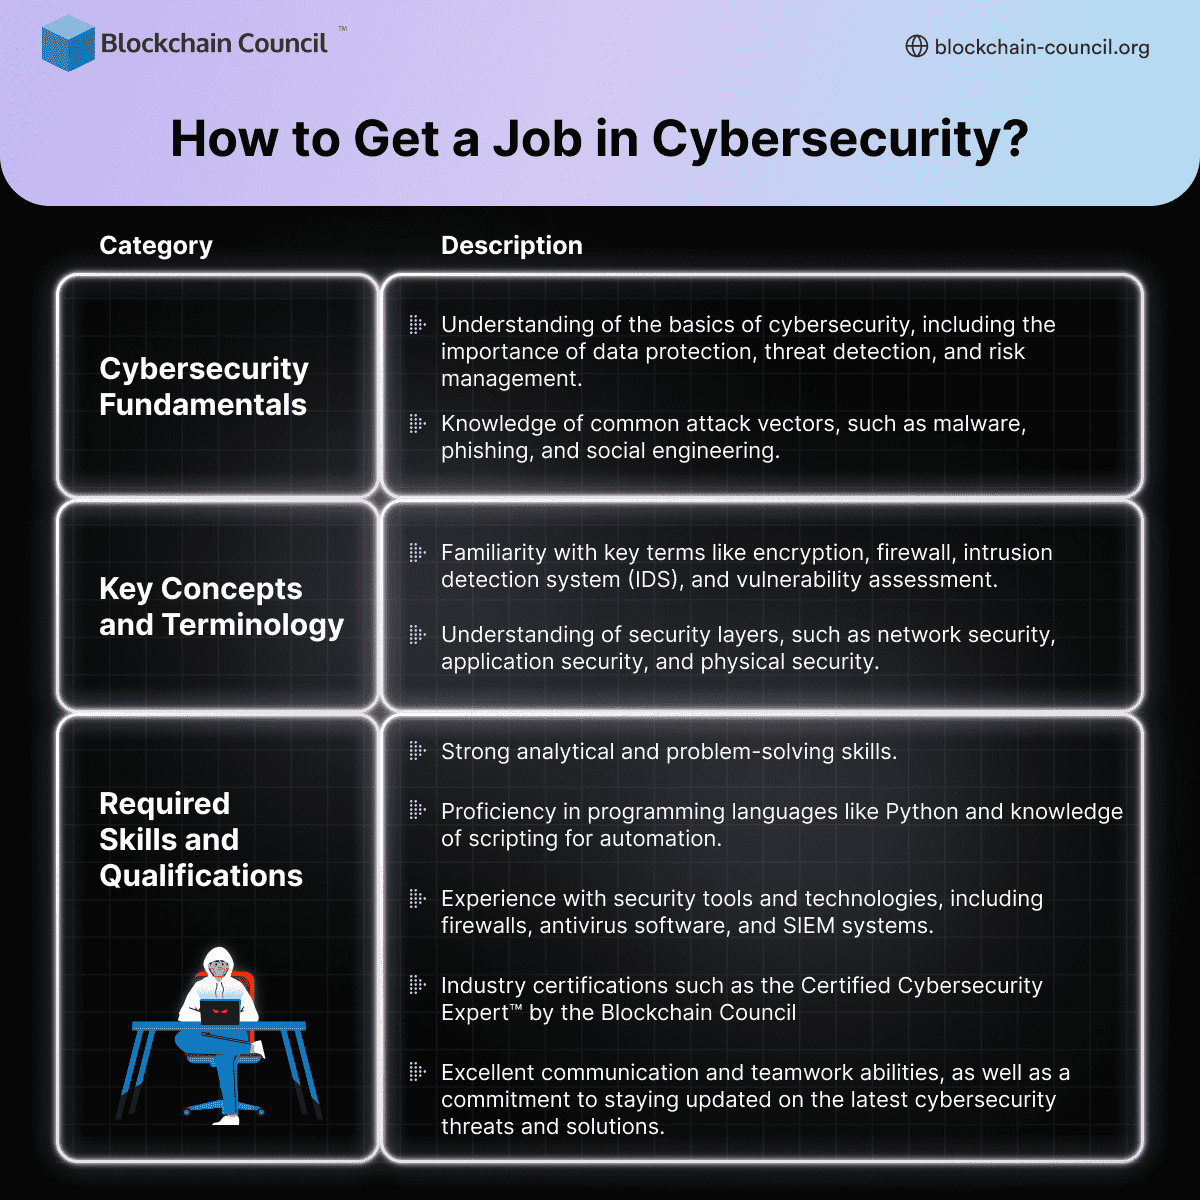 How to Get a Job in Cybersecurity